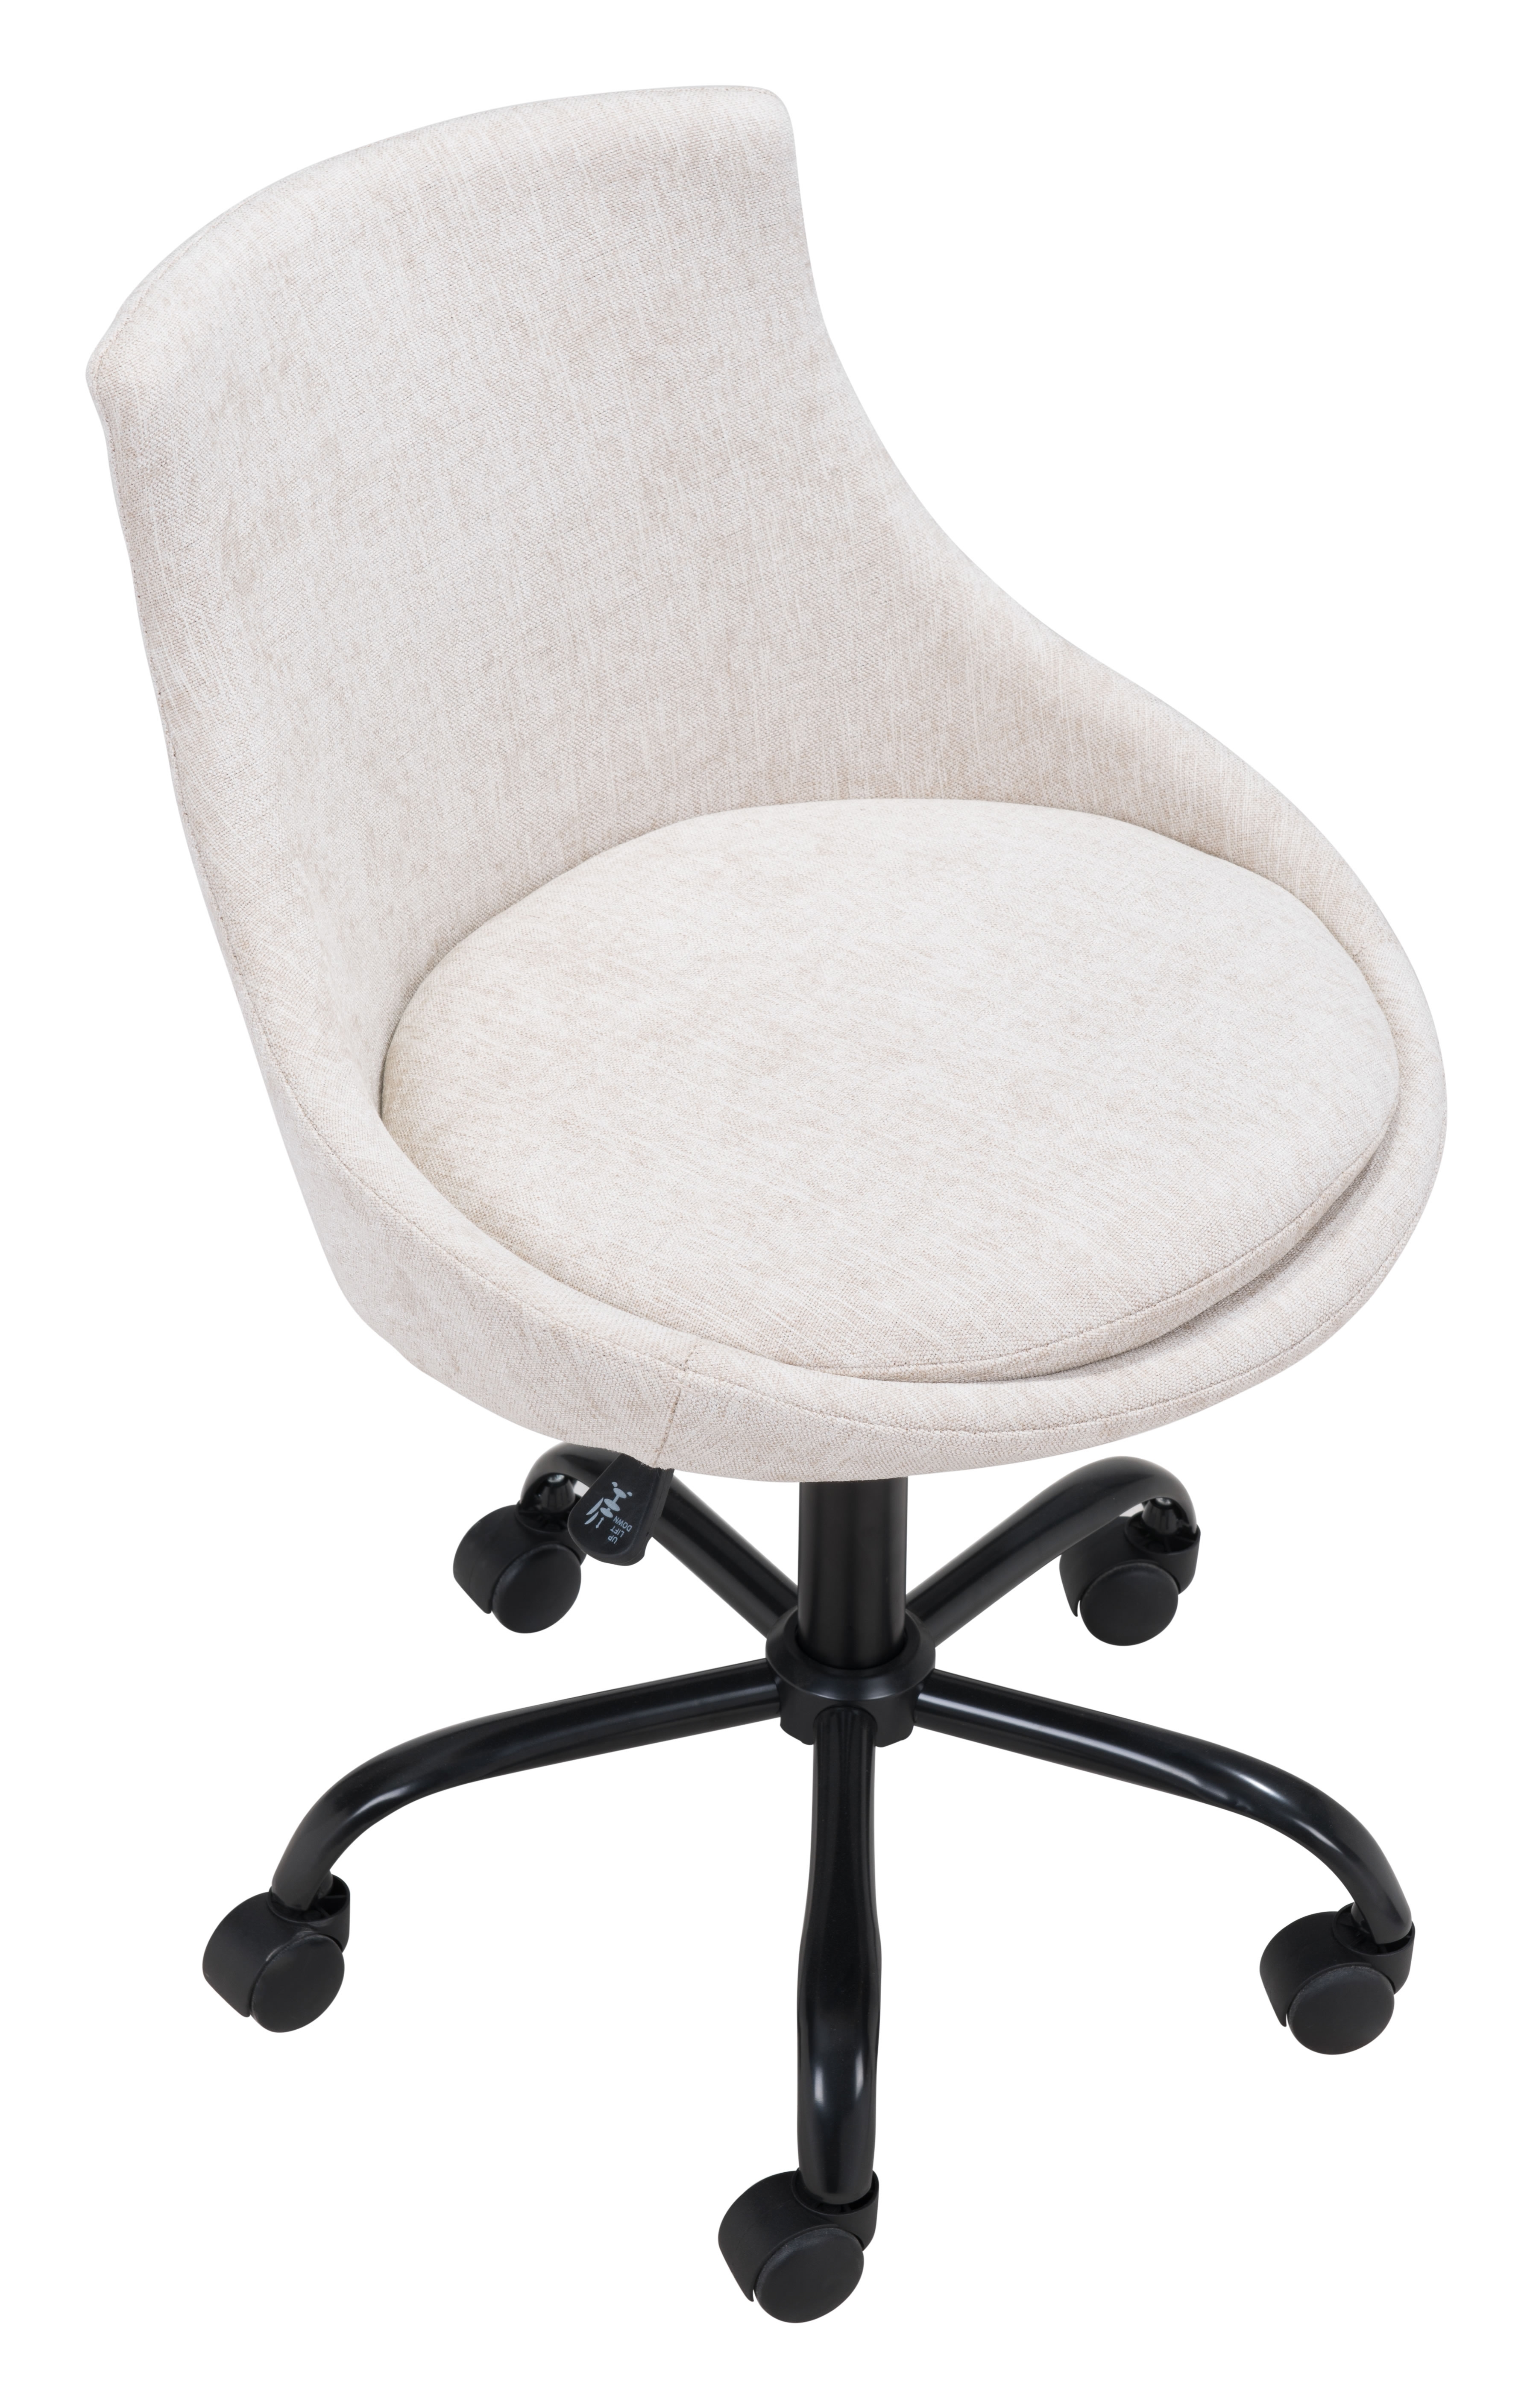 Maury Office Chair, Beige - Image 2